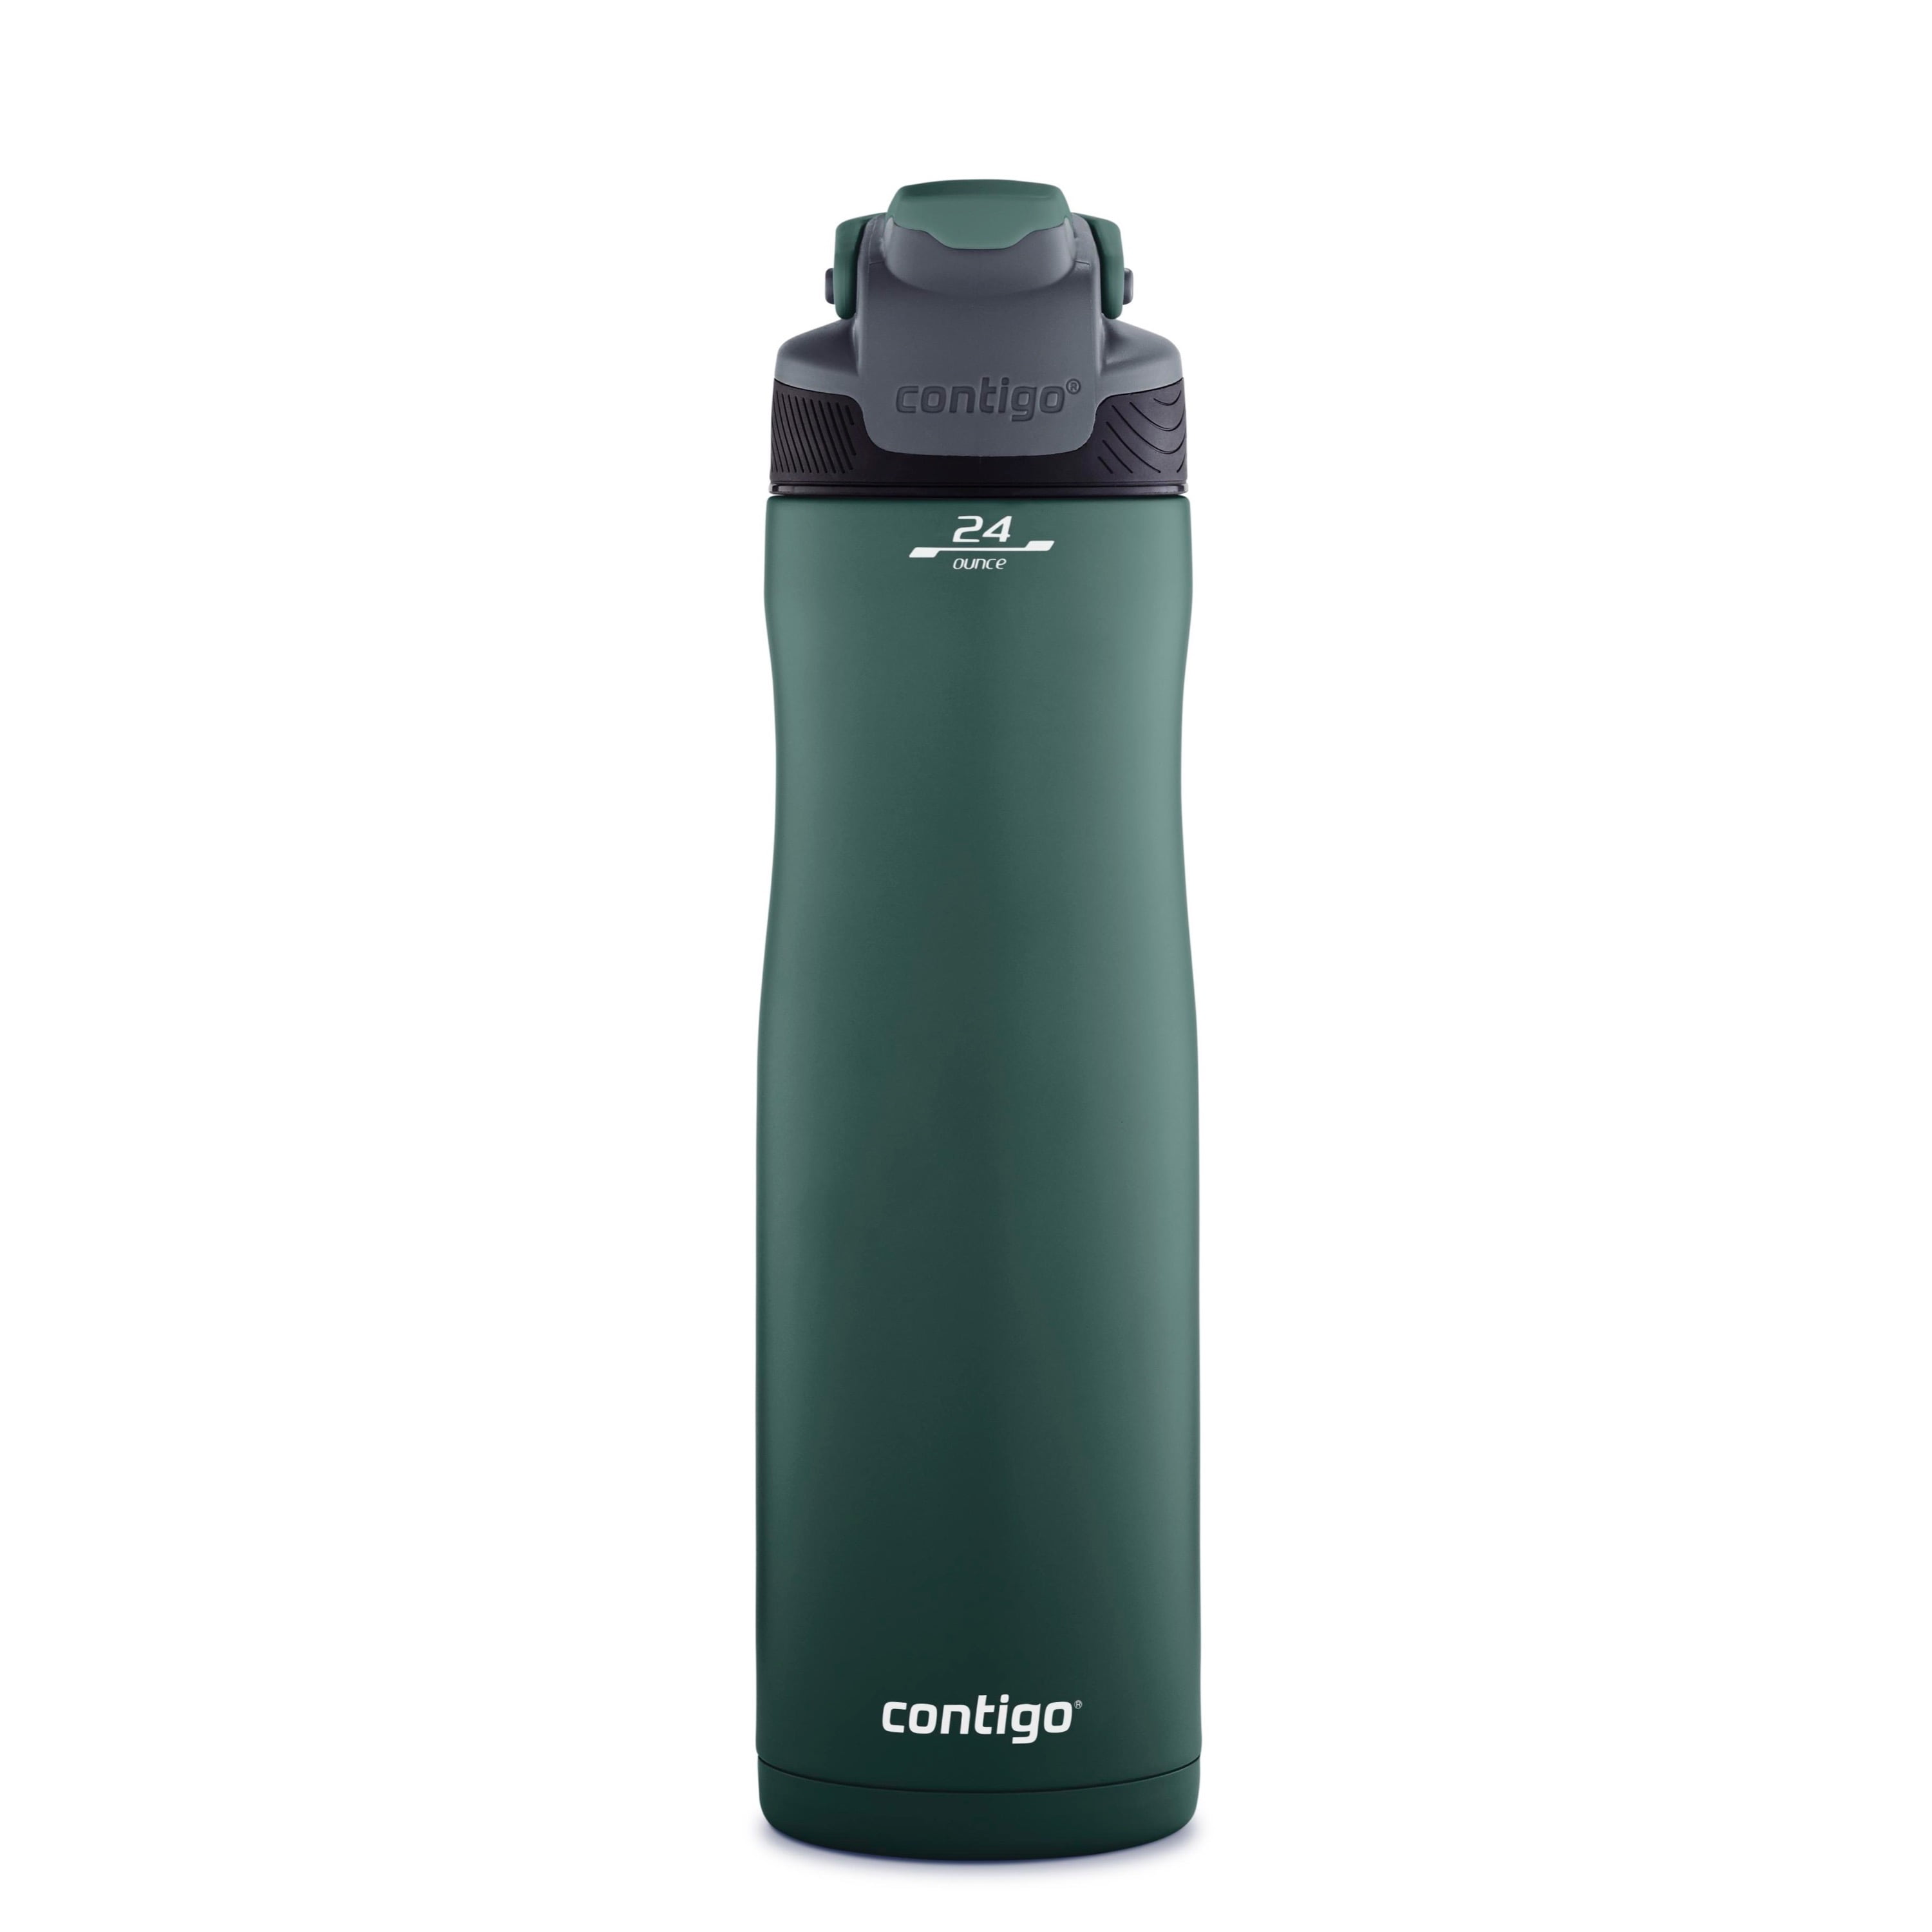 AutoSeal Chill Vacuum Insulated Stainless Steel Water Bottle Contigo 24 oz 